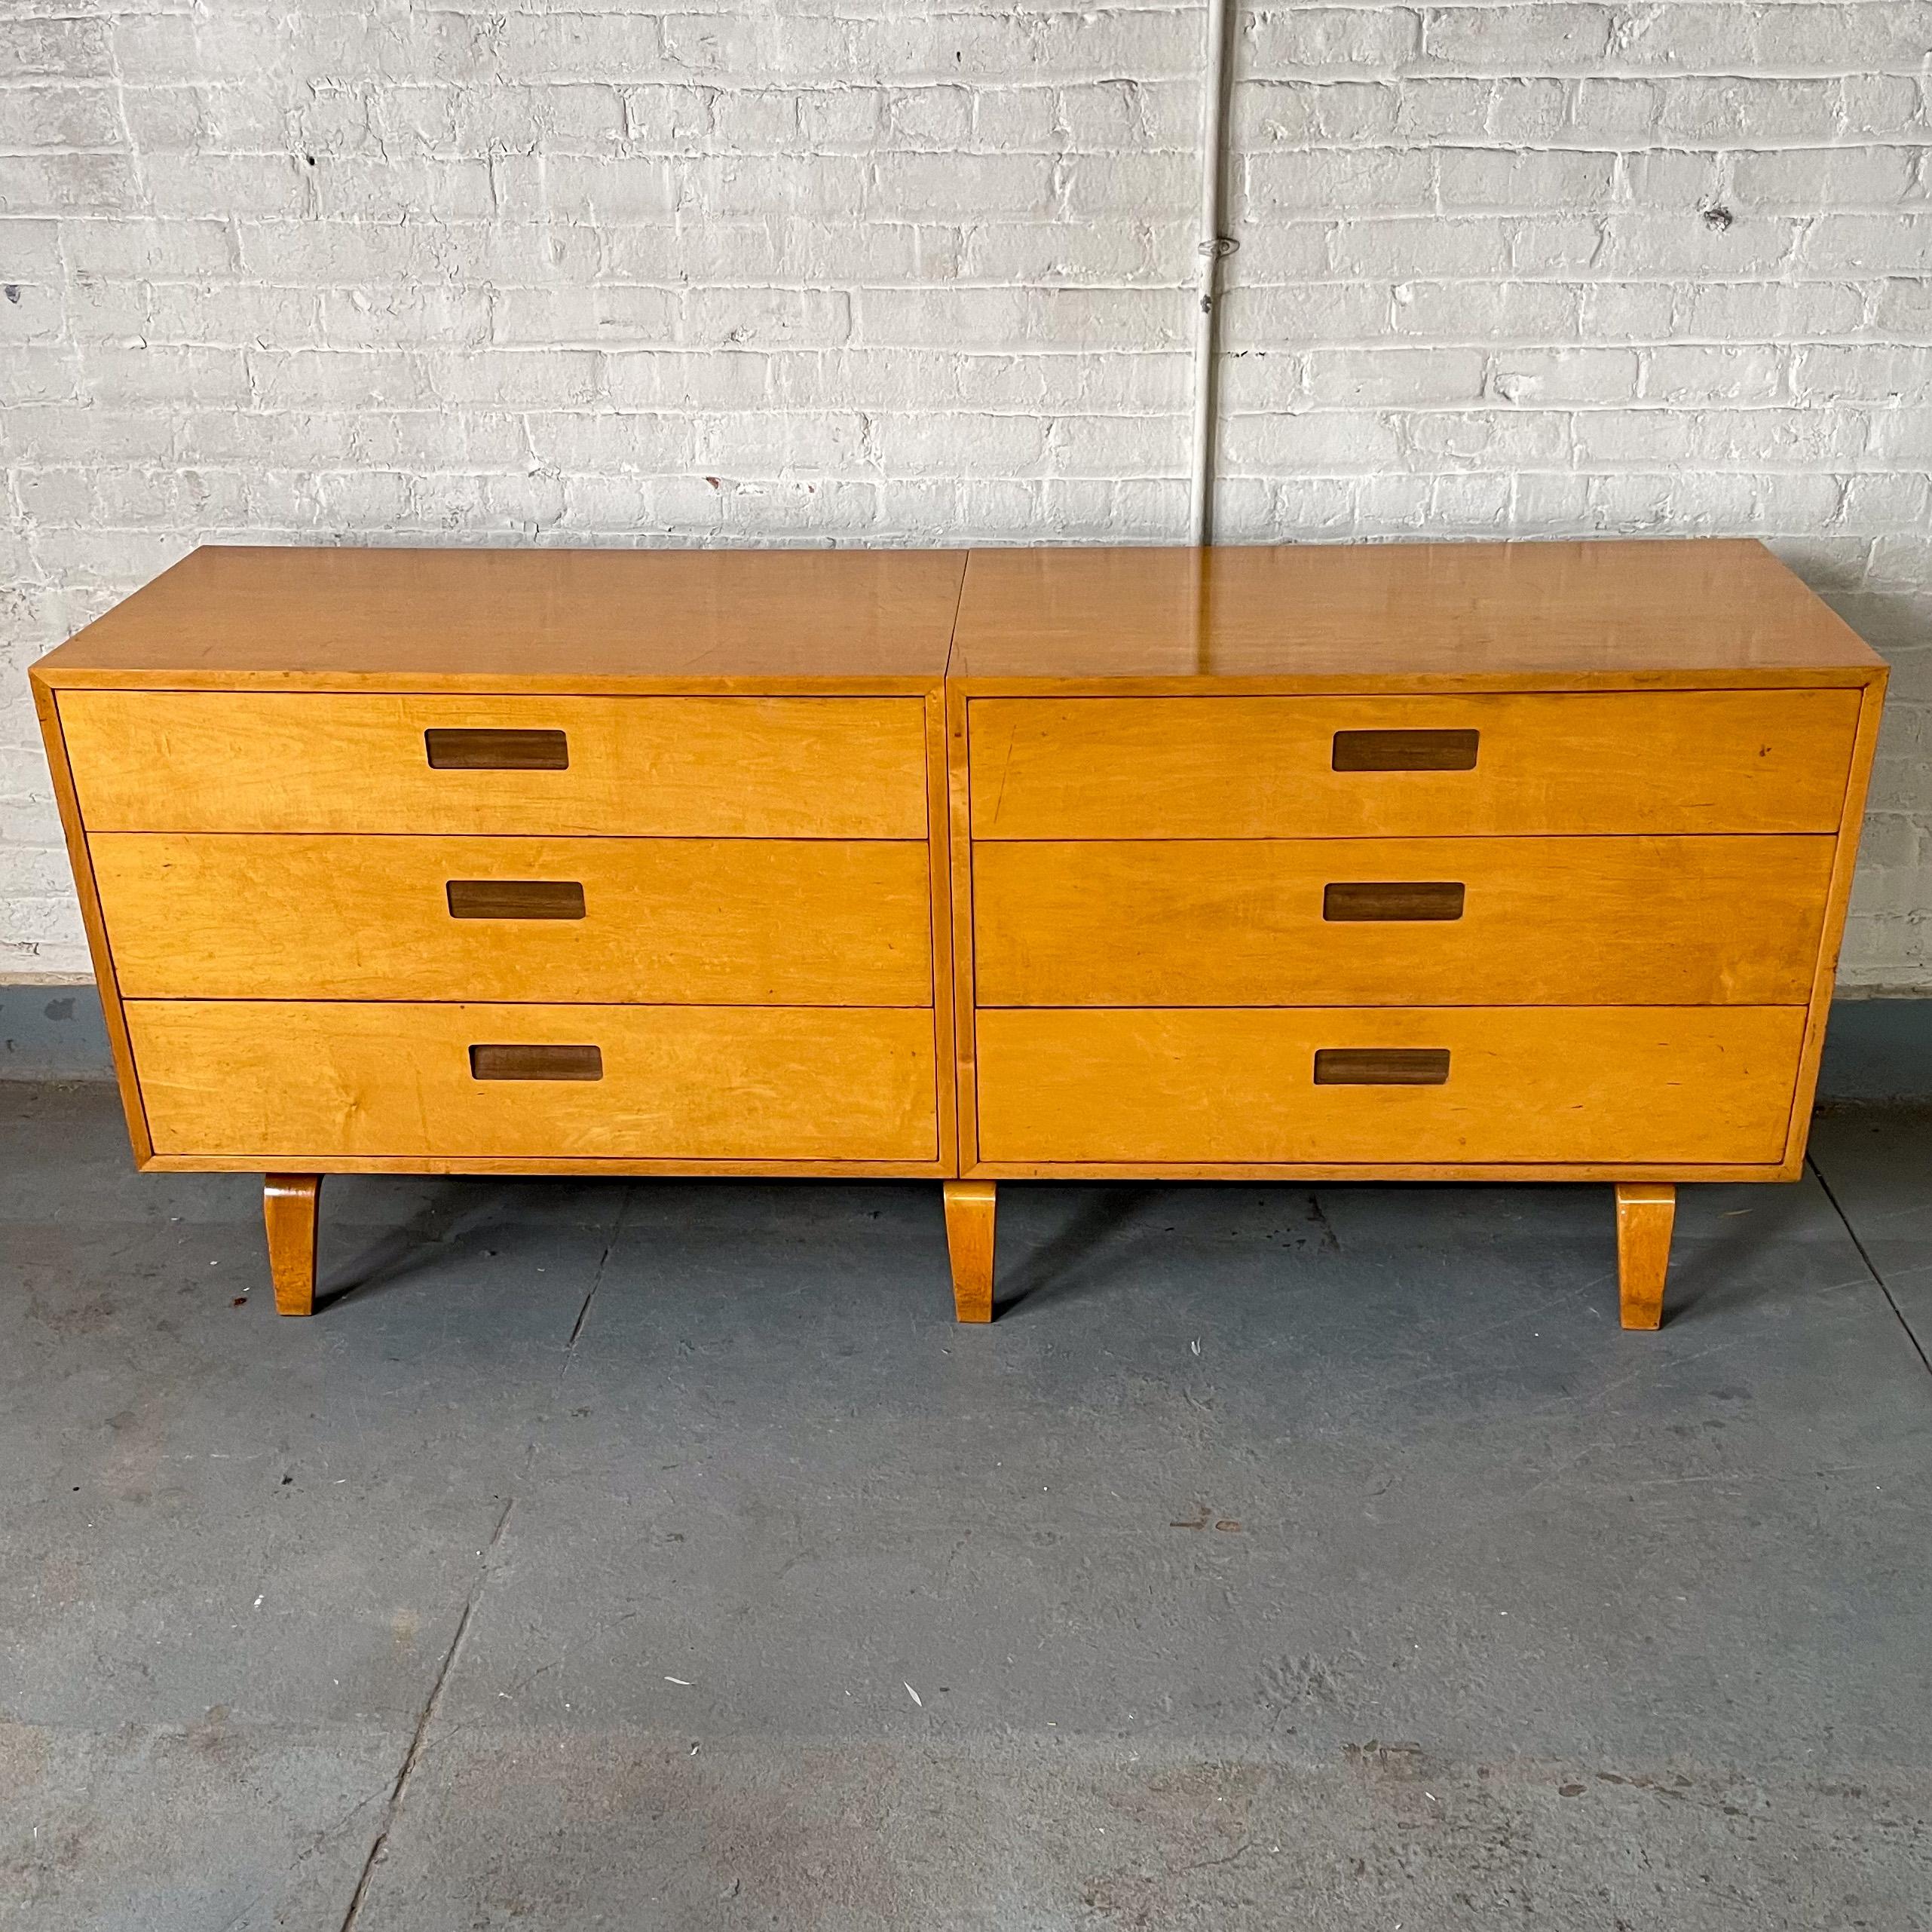 Storage unit composed of two four-drawer (#9568) chests atop a single “LA” series base with laminated plywood legs. Designed by Clifford Pascoe for Pascoe Industries and produced circa 1949. According to his 1949 bio in Furniture Forum, “Pascoe, a